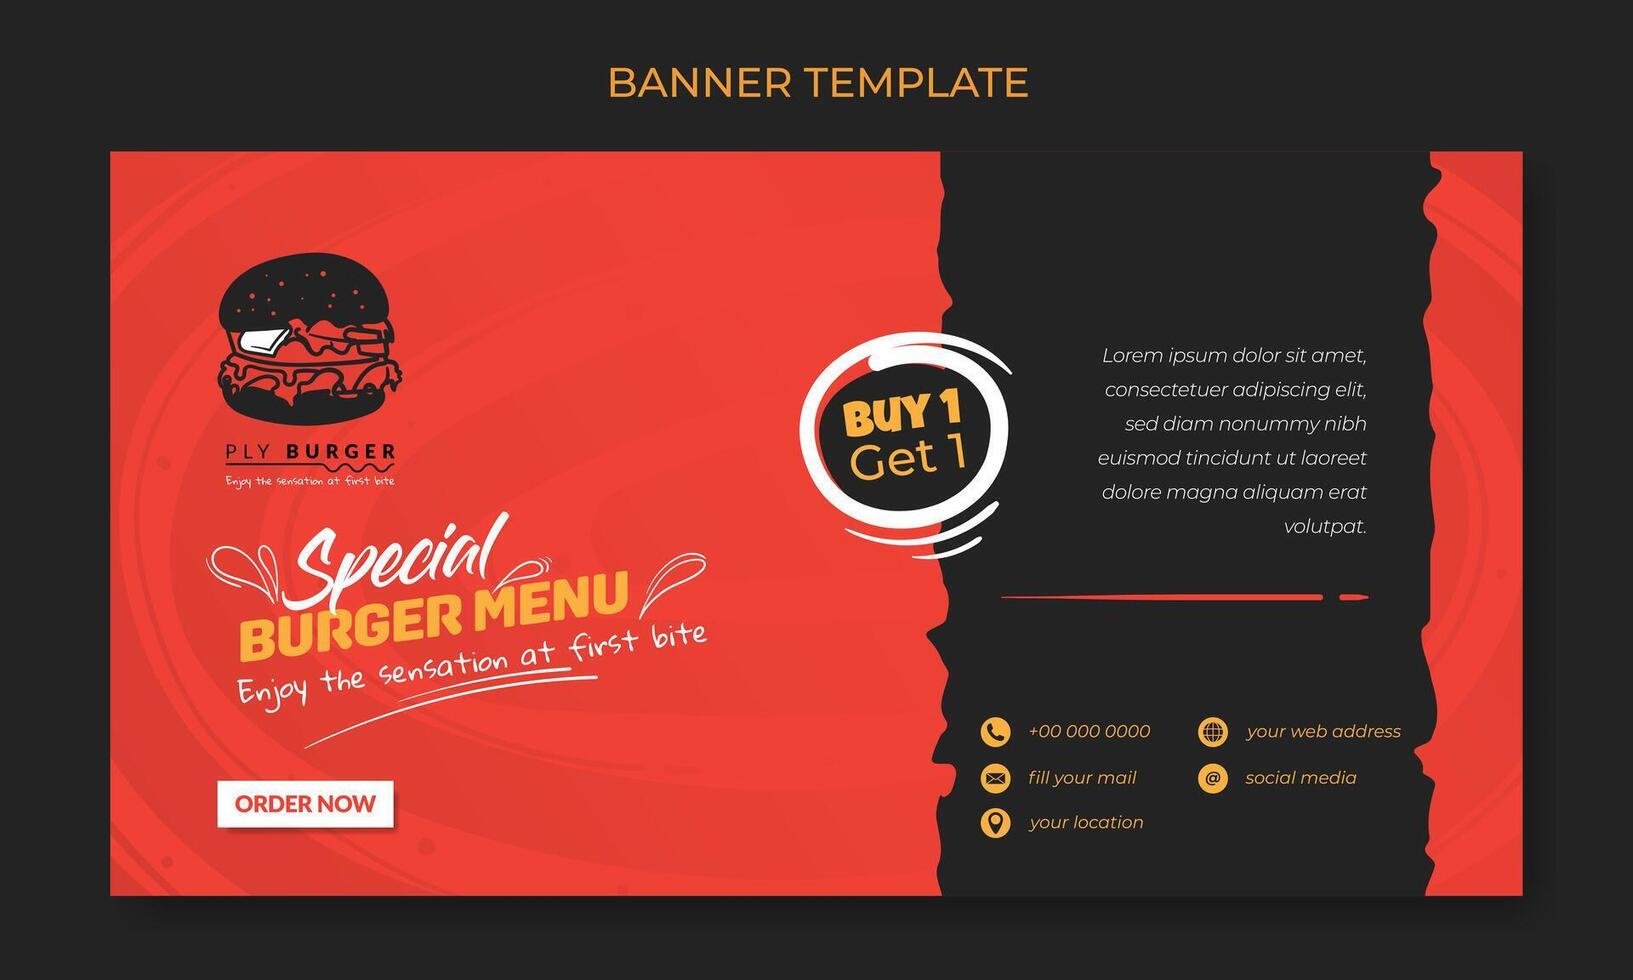 Banner template design with red and black background with burger icon design for advertisement design vector